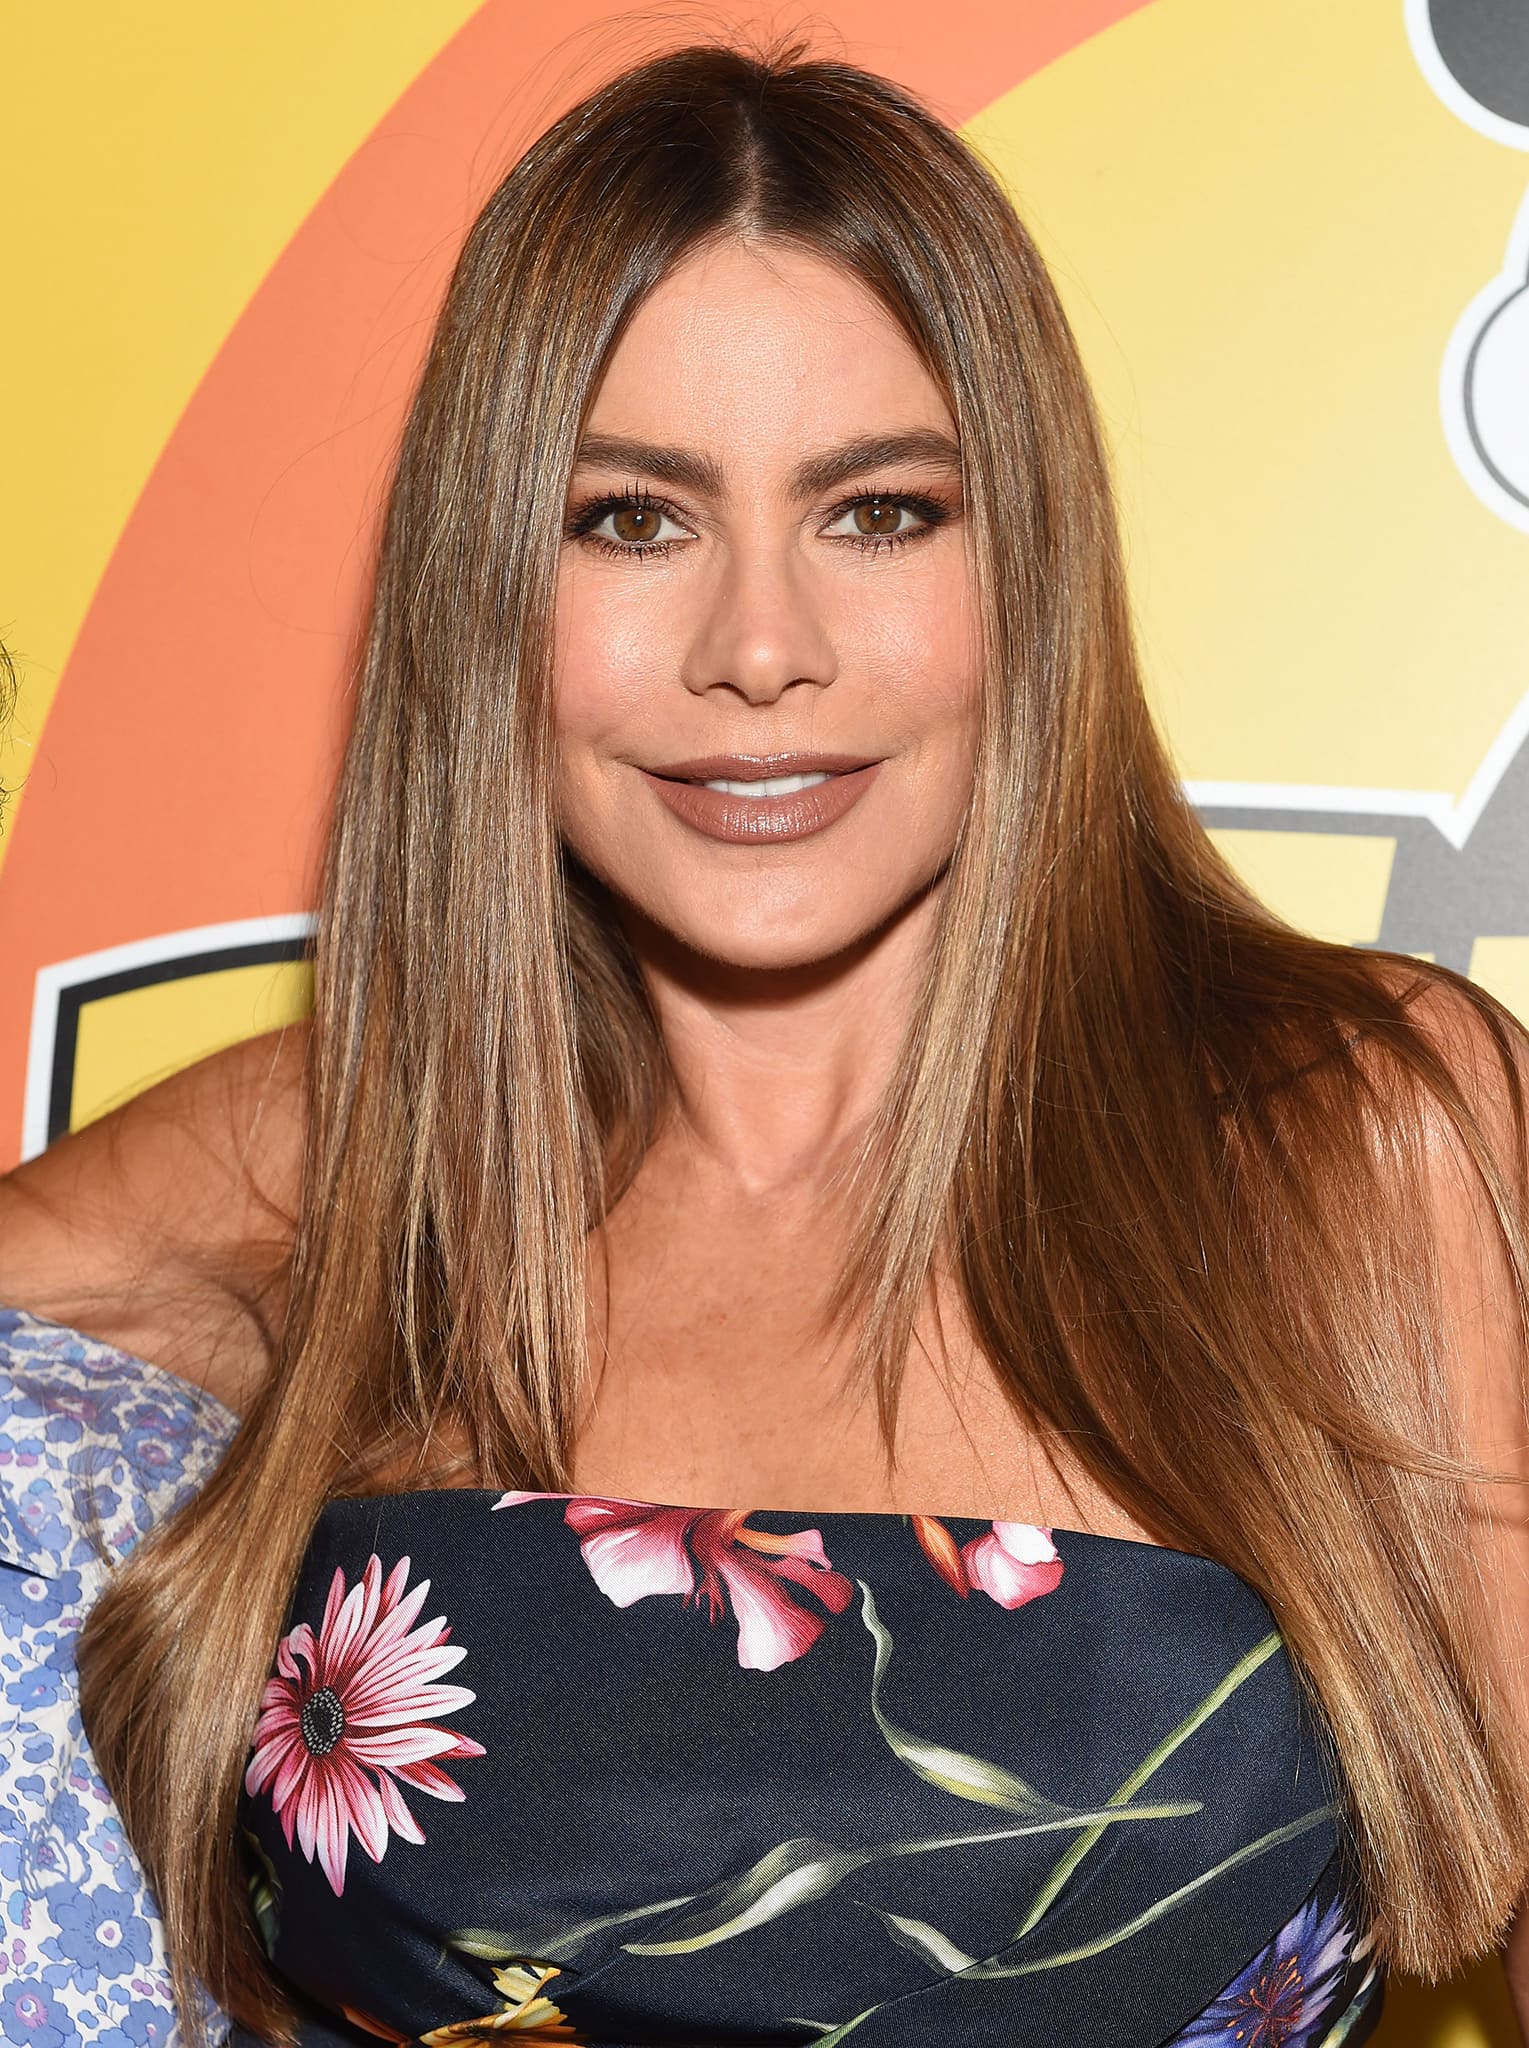 Sofia Vergara was diagnosed with thyroid cancer at 28 in 2000